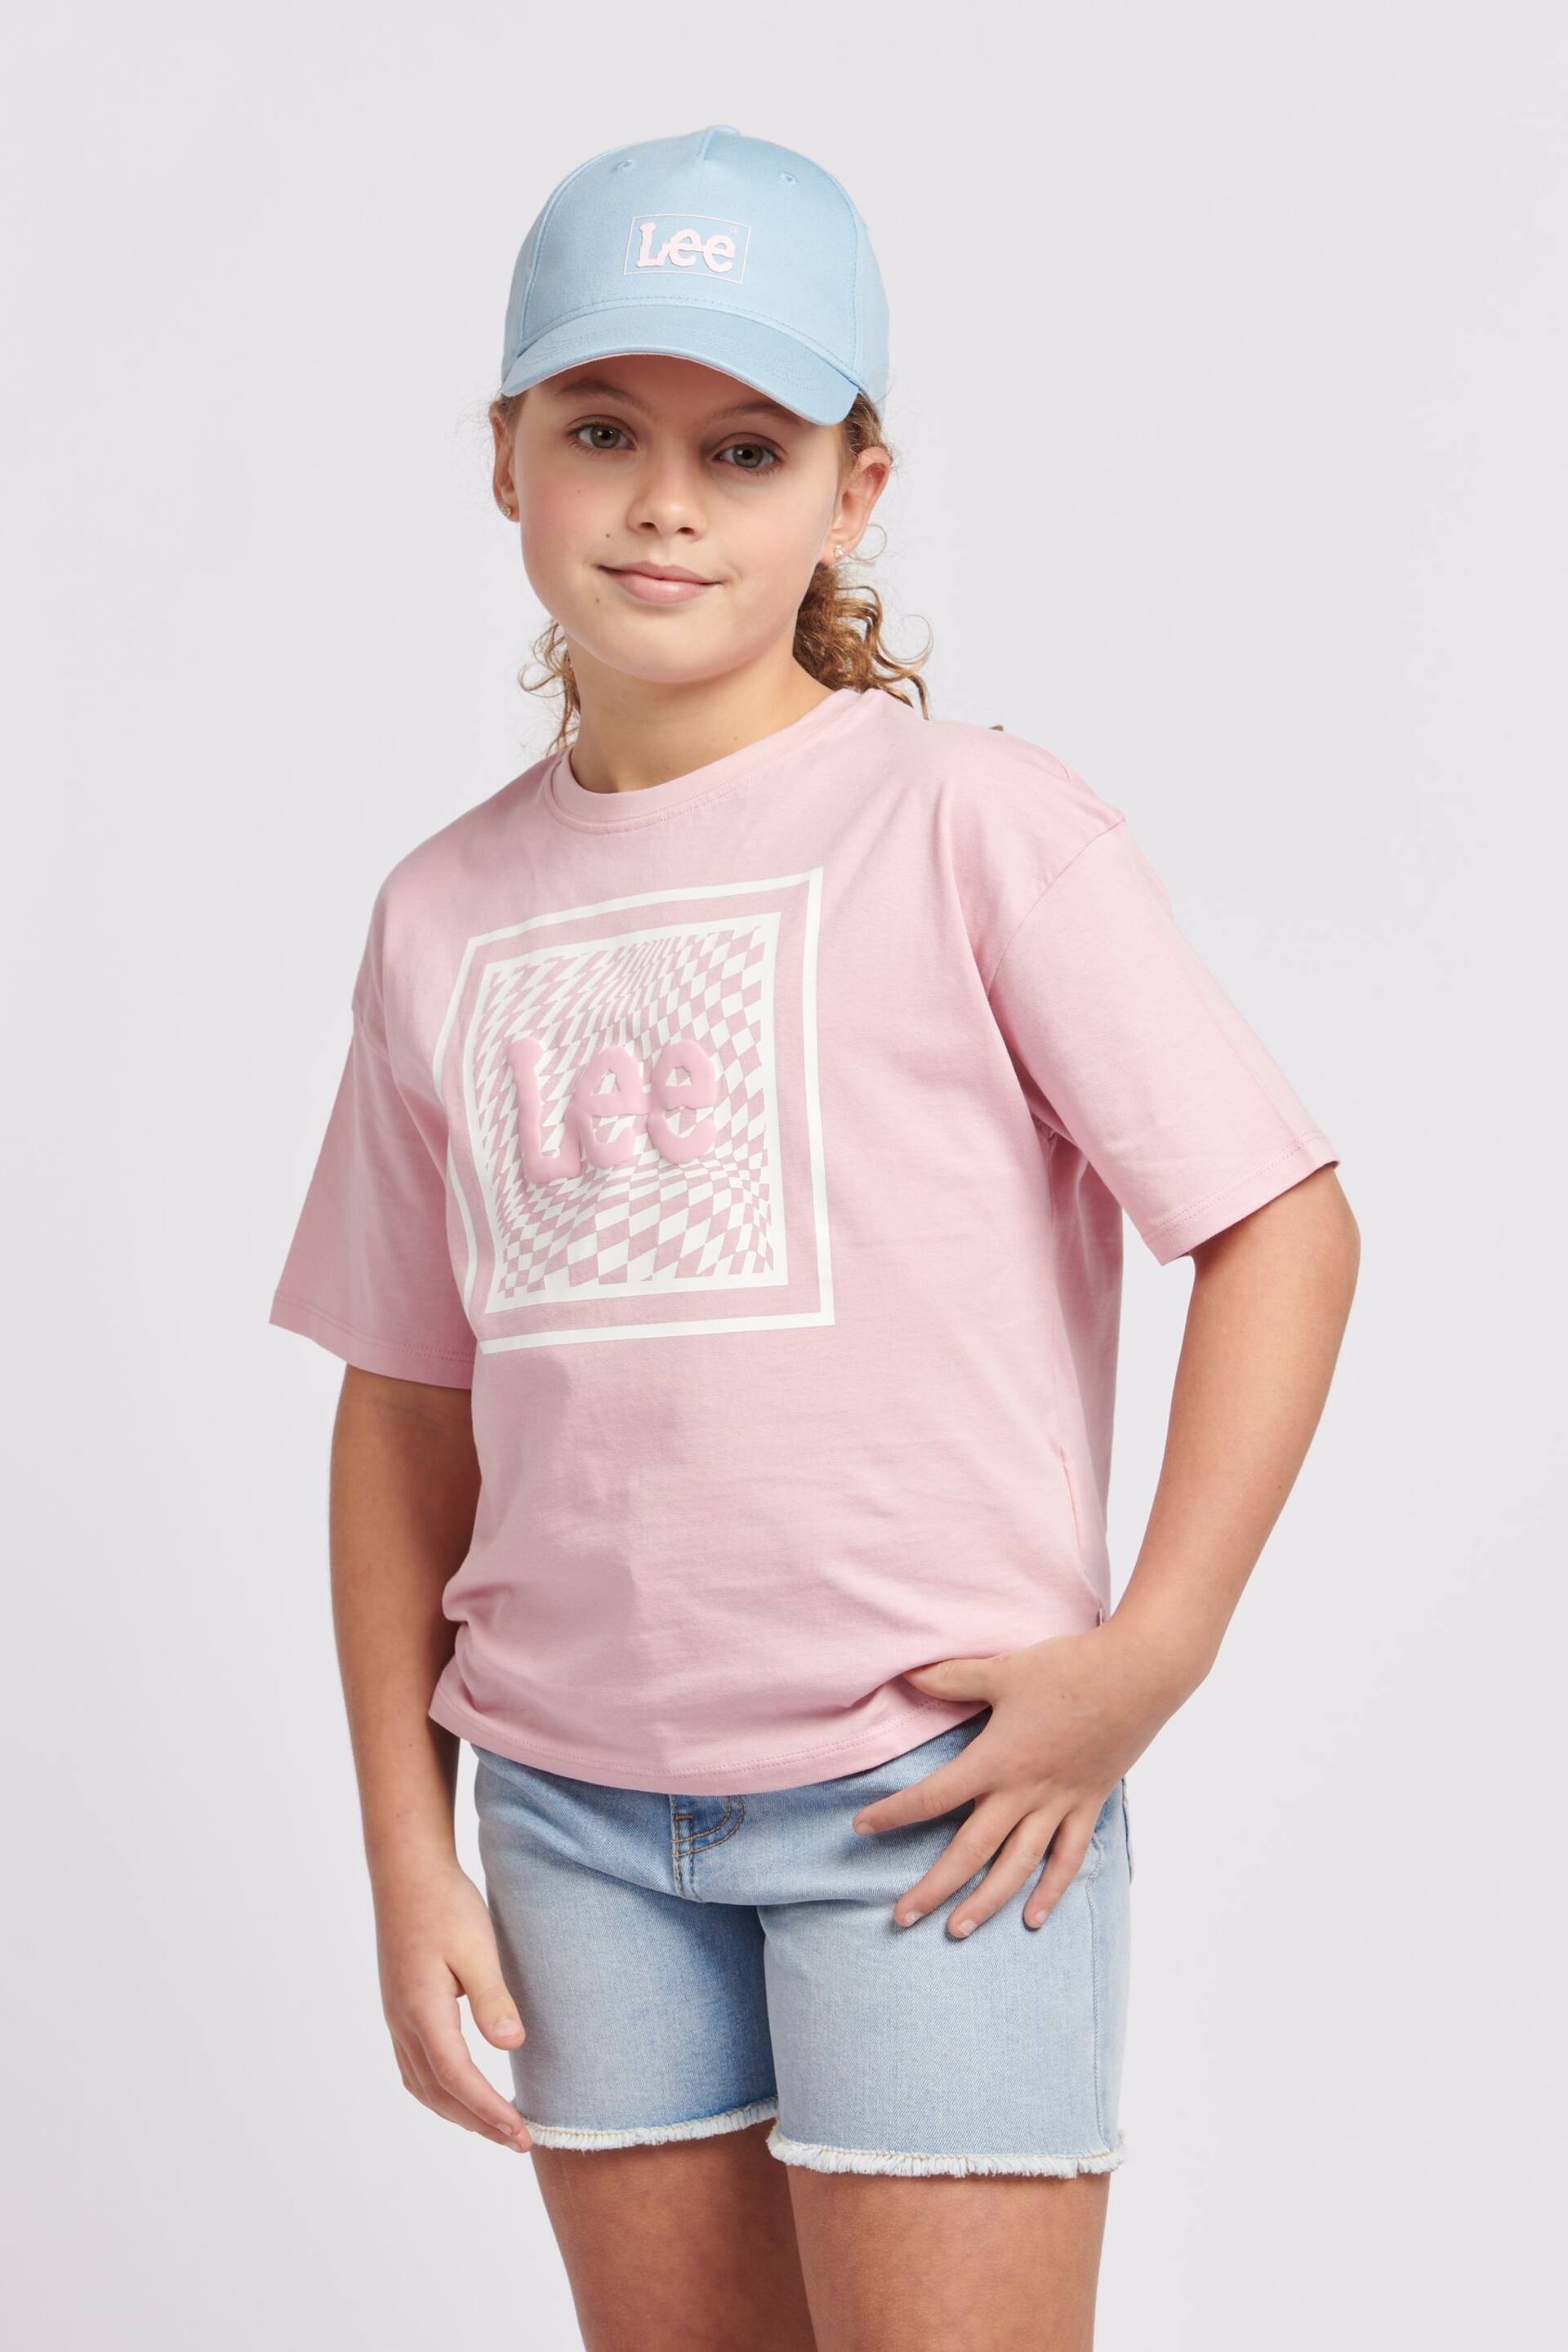 Lee Girls Pink Check Graphic Boxy Fit T-Shirt - Image 1 of 9